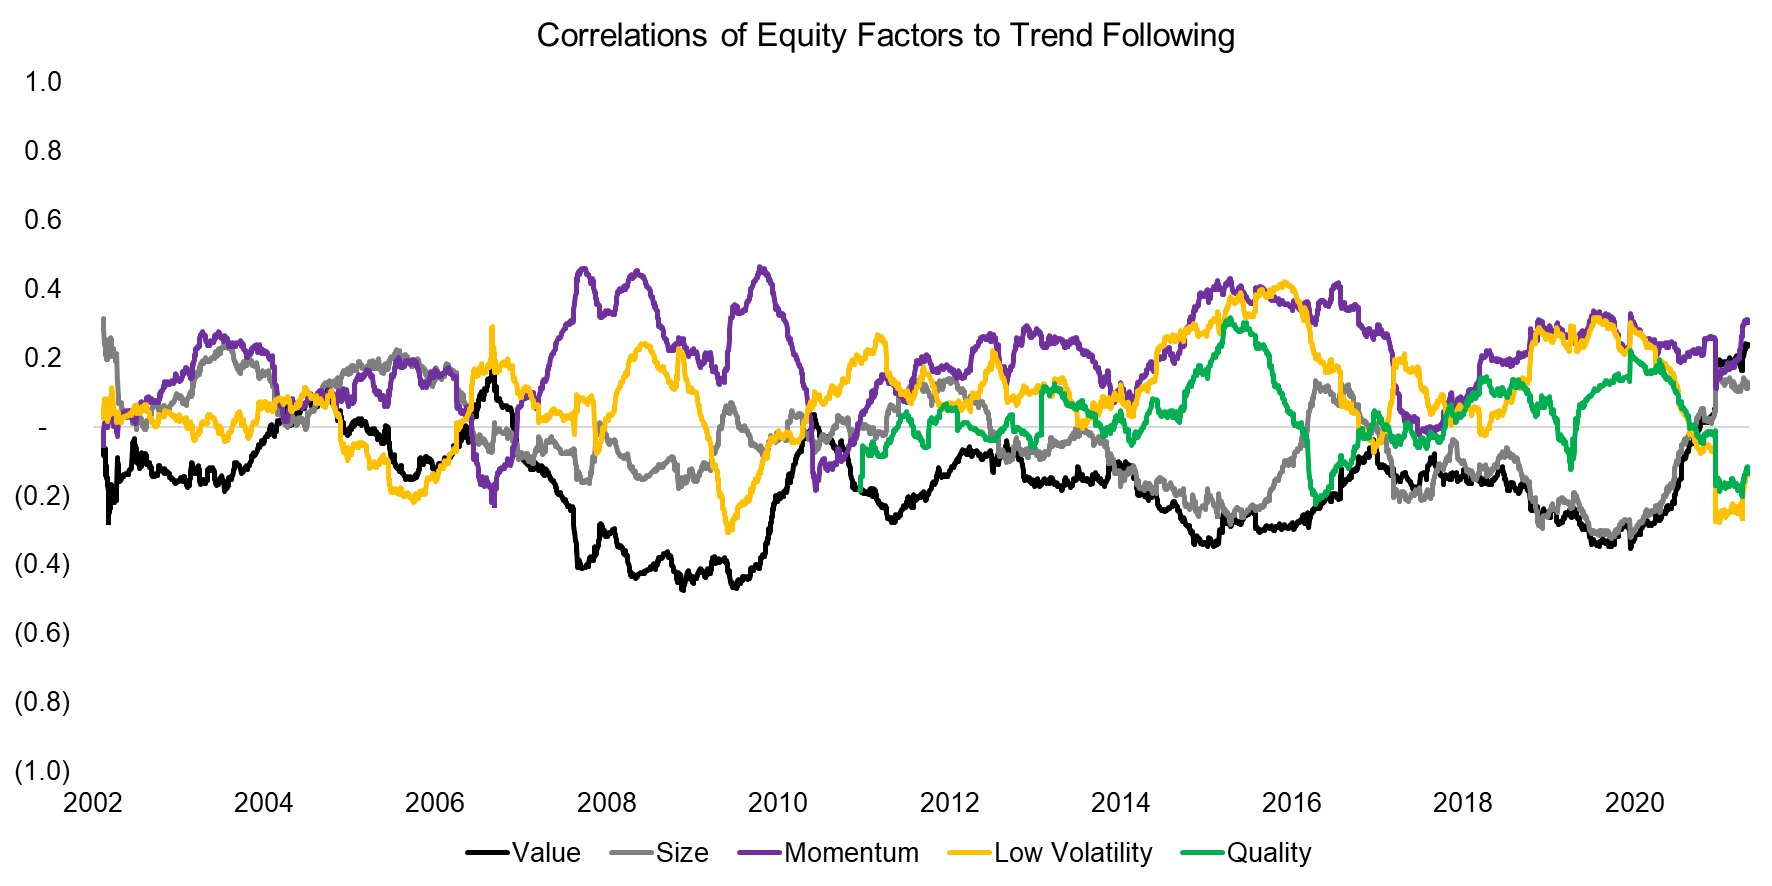 Correlations of Equity Factors to Trend Following